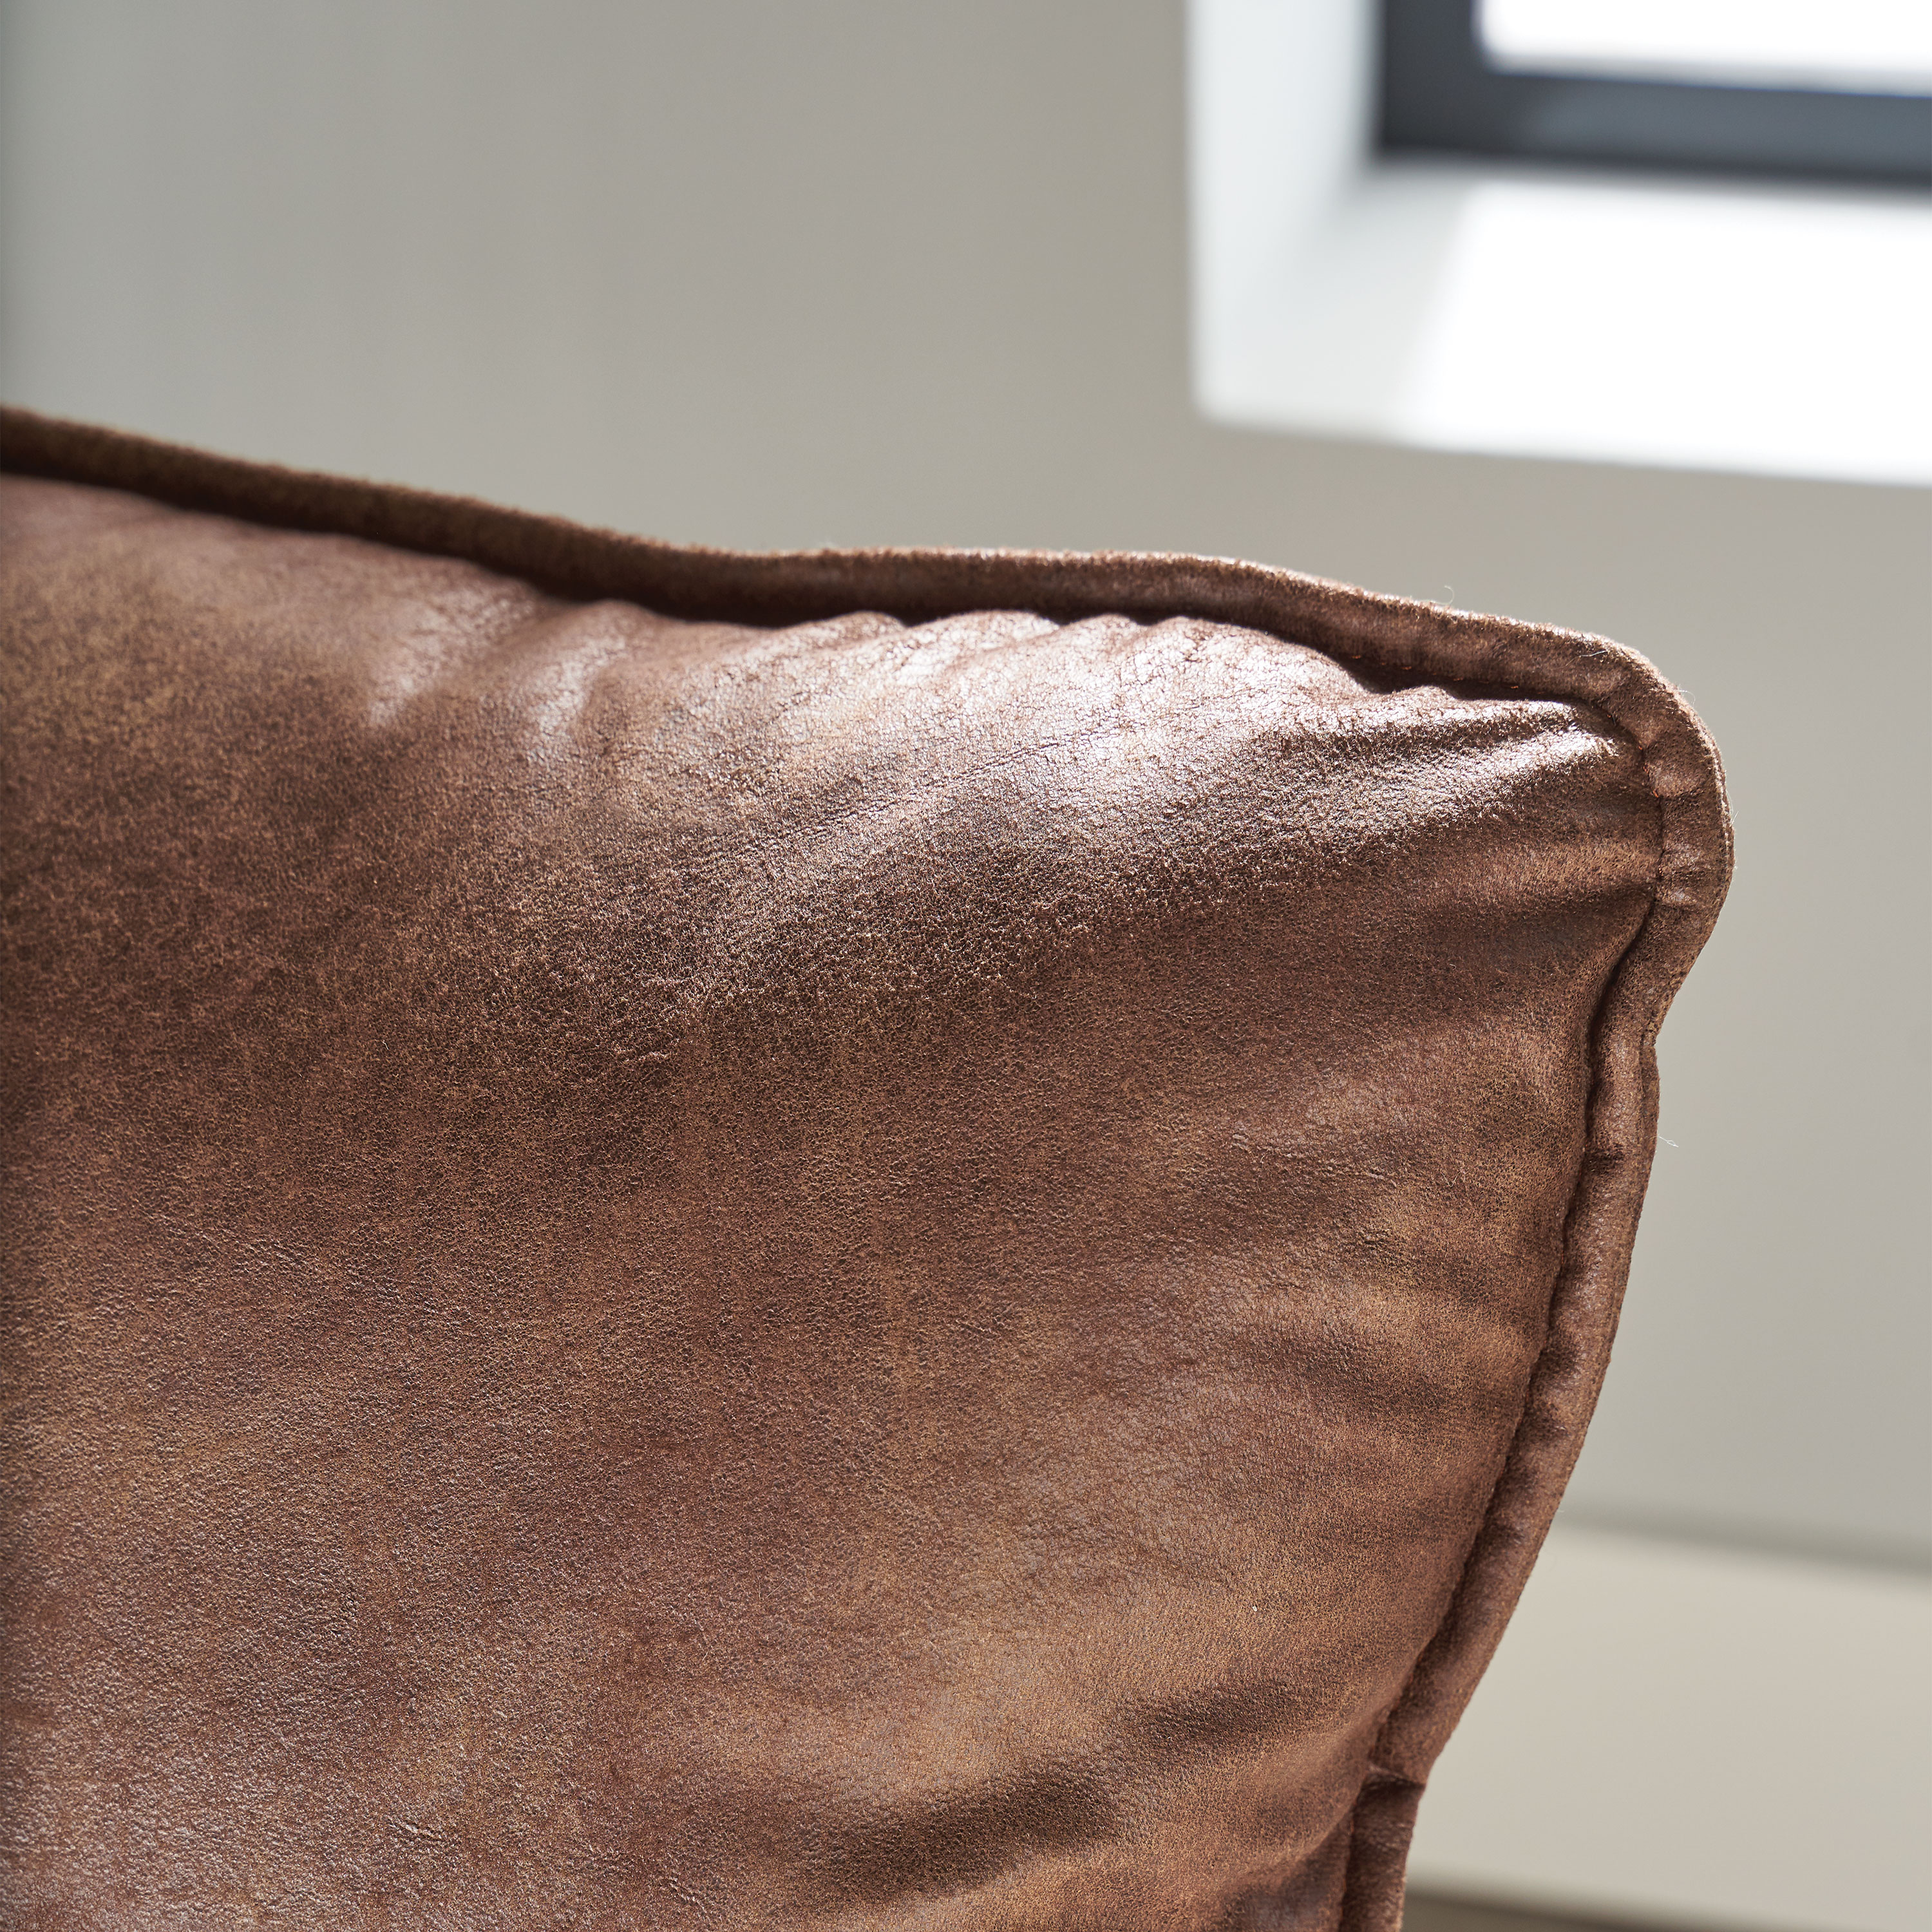 Better Homes & Gardens Pillow Lounge, Accent Chair, Brown Faux Leather Upholstery - image 4 of 9